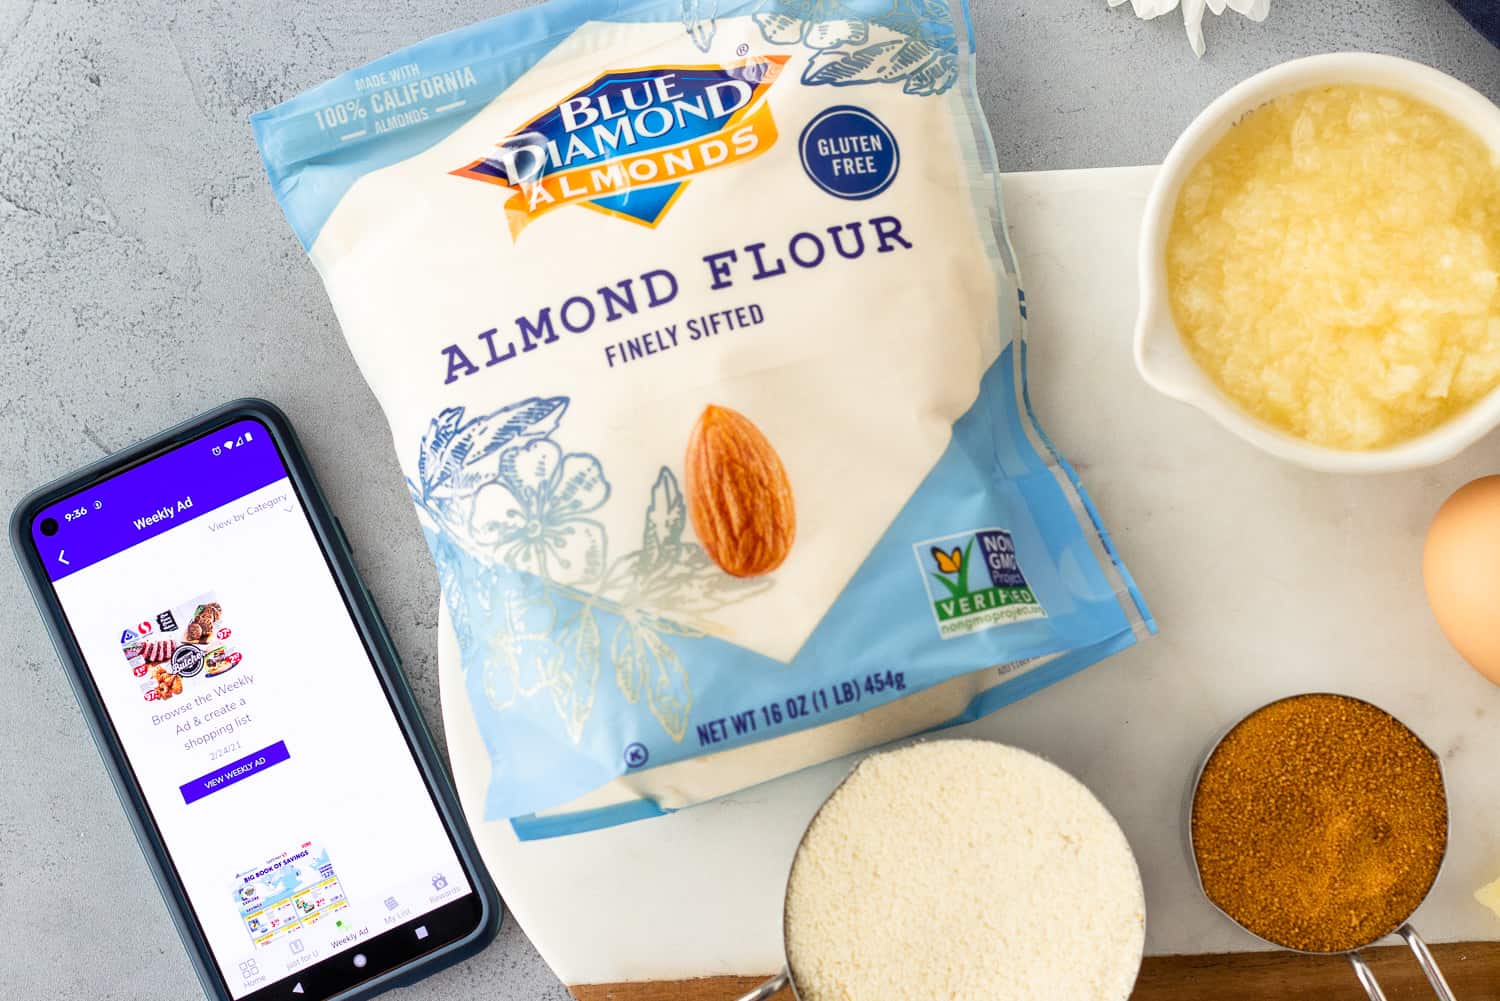 Cell phone with the Albertson's app and Almond Flour package with other ingredients.